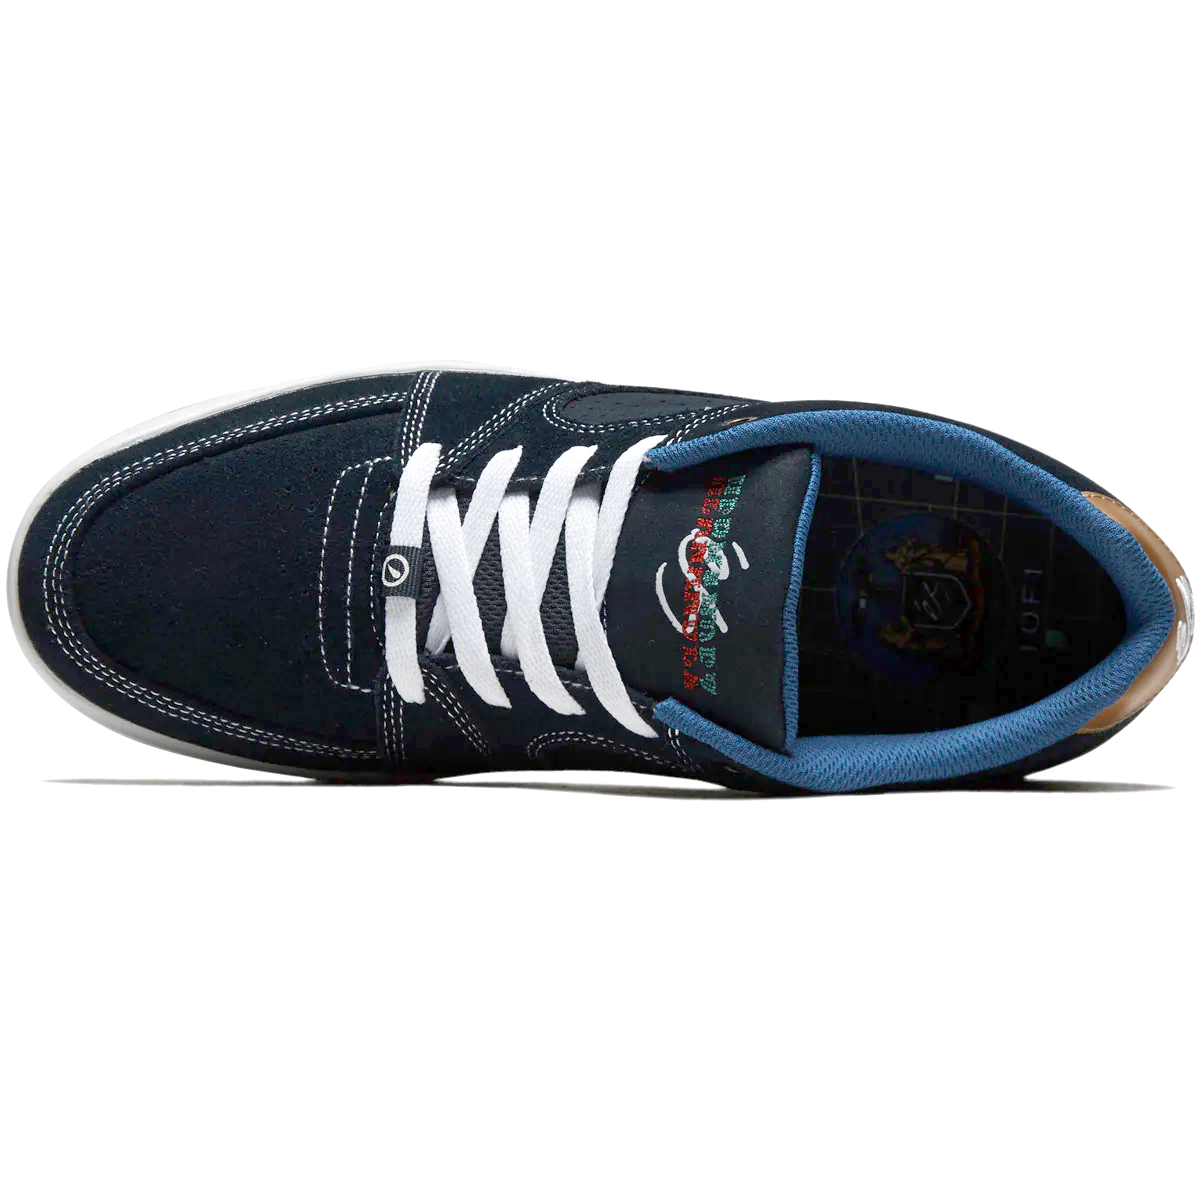 eS Accel Slim Shoes - Navy/White/Red image 3